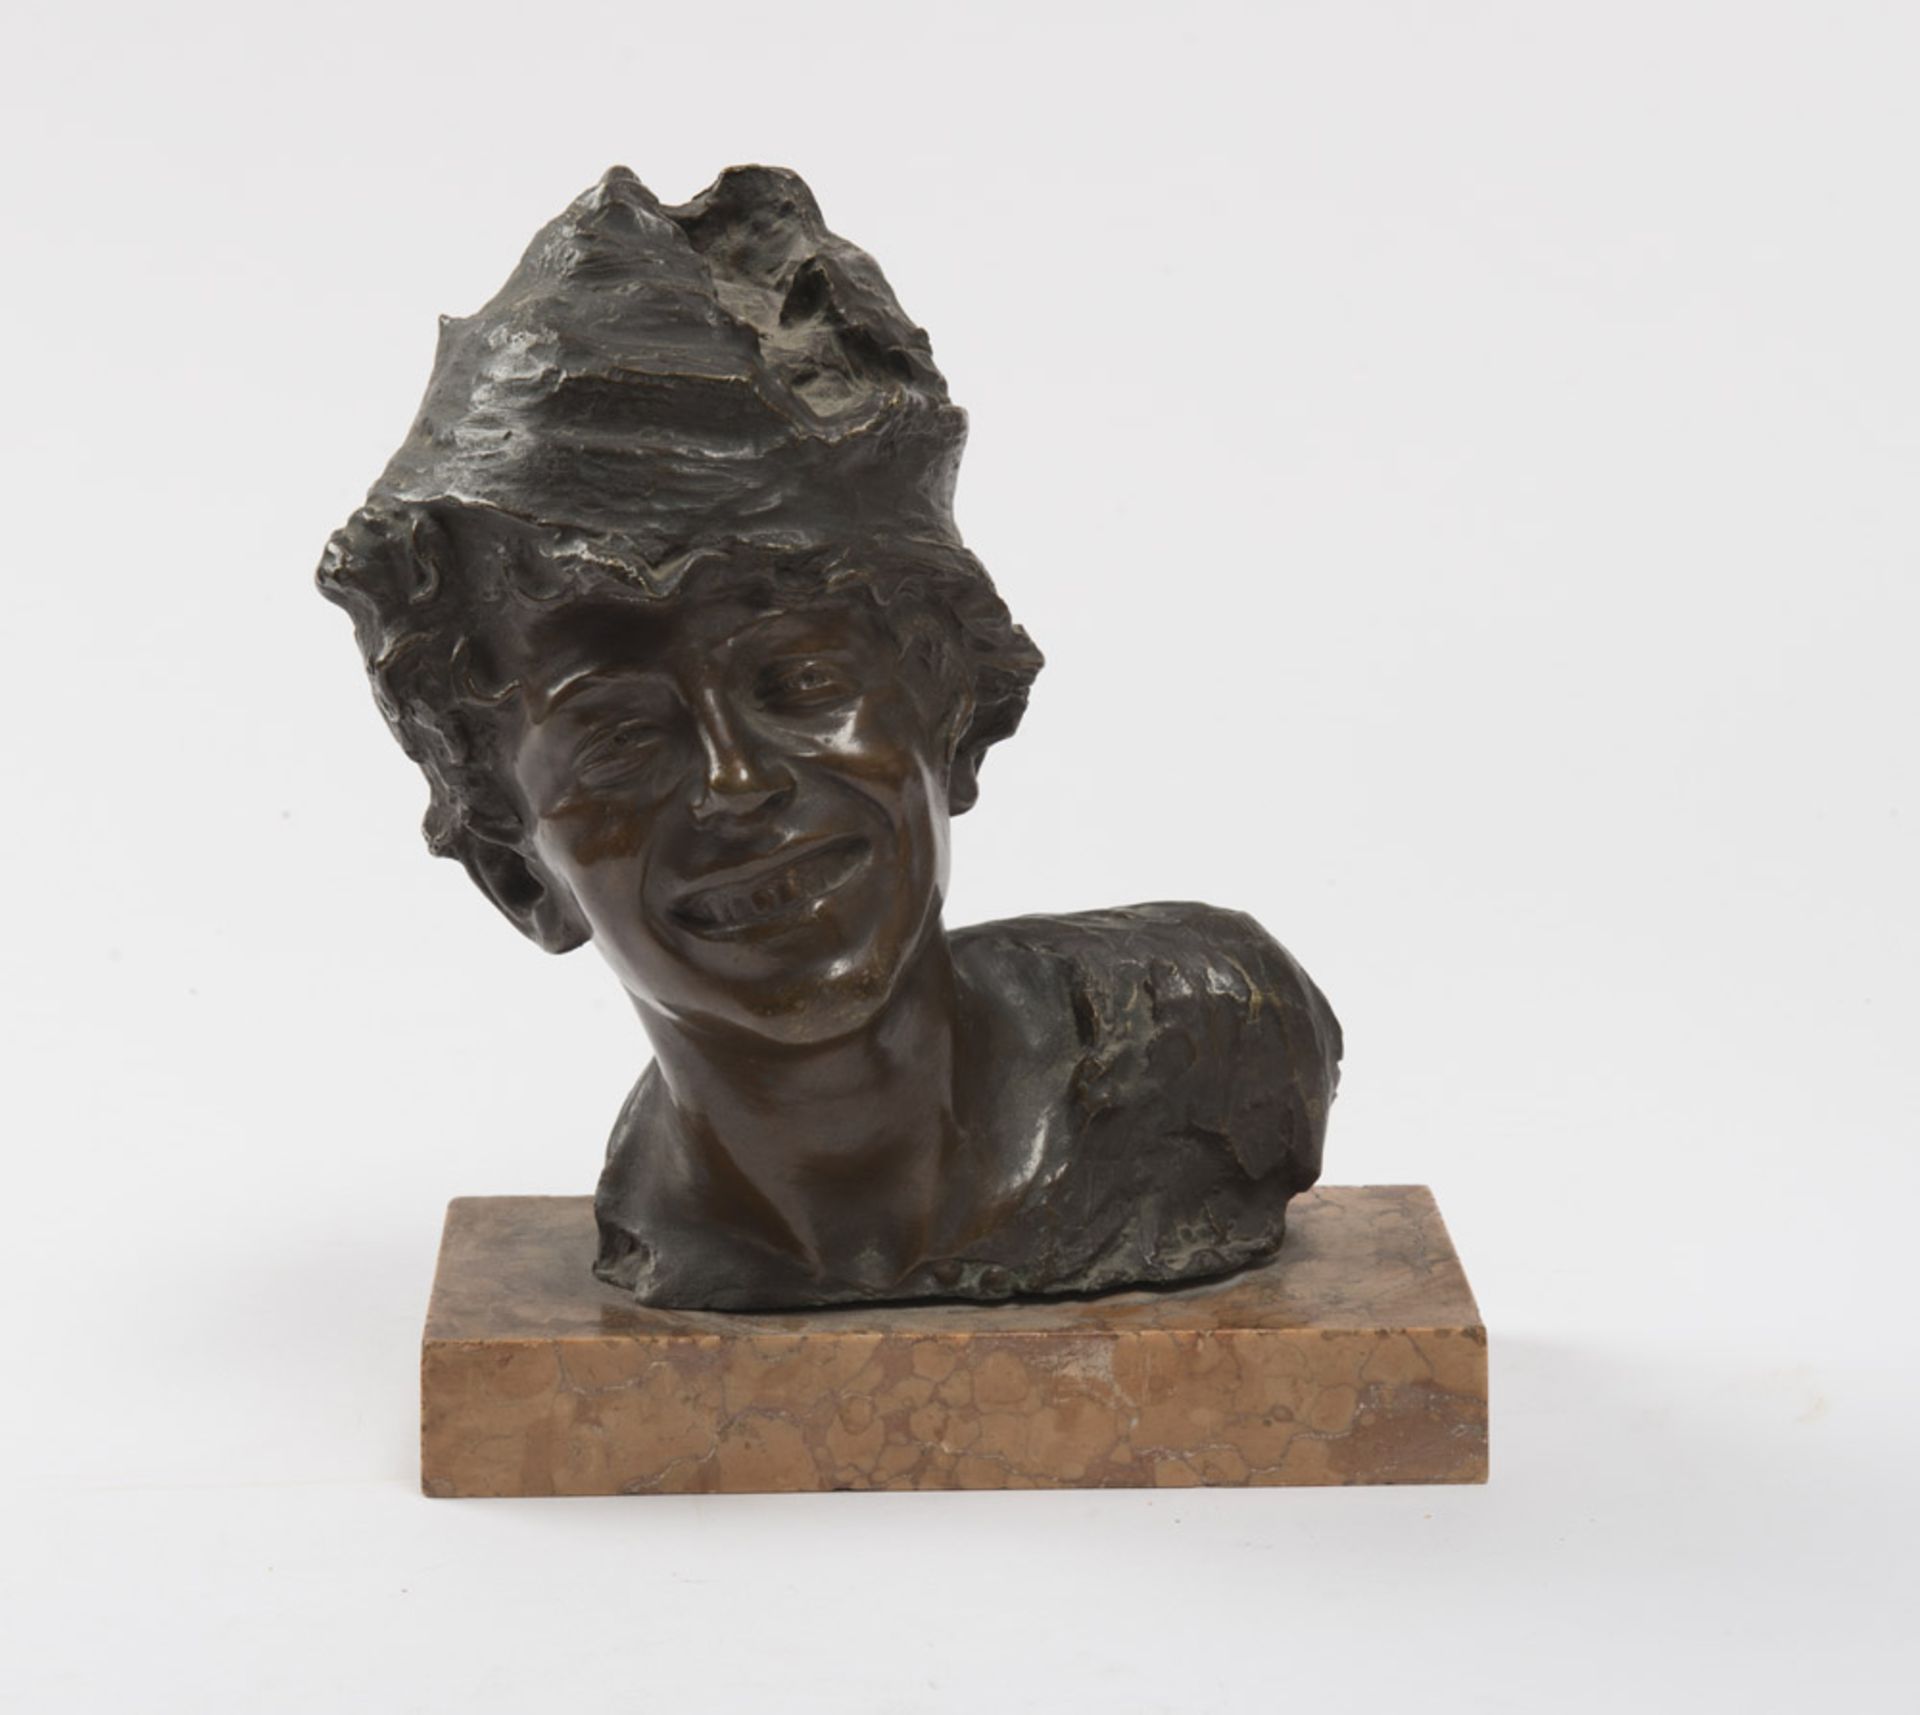 VINCENZO AURISICCHIO (Active in Naples, 19th-20th century) Bust of smiling urchin Lost wax casting